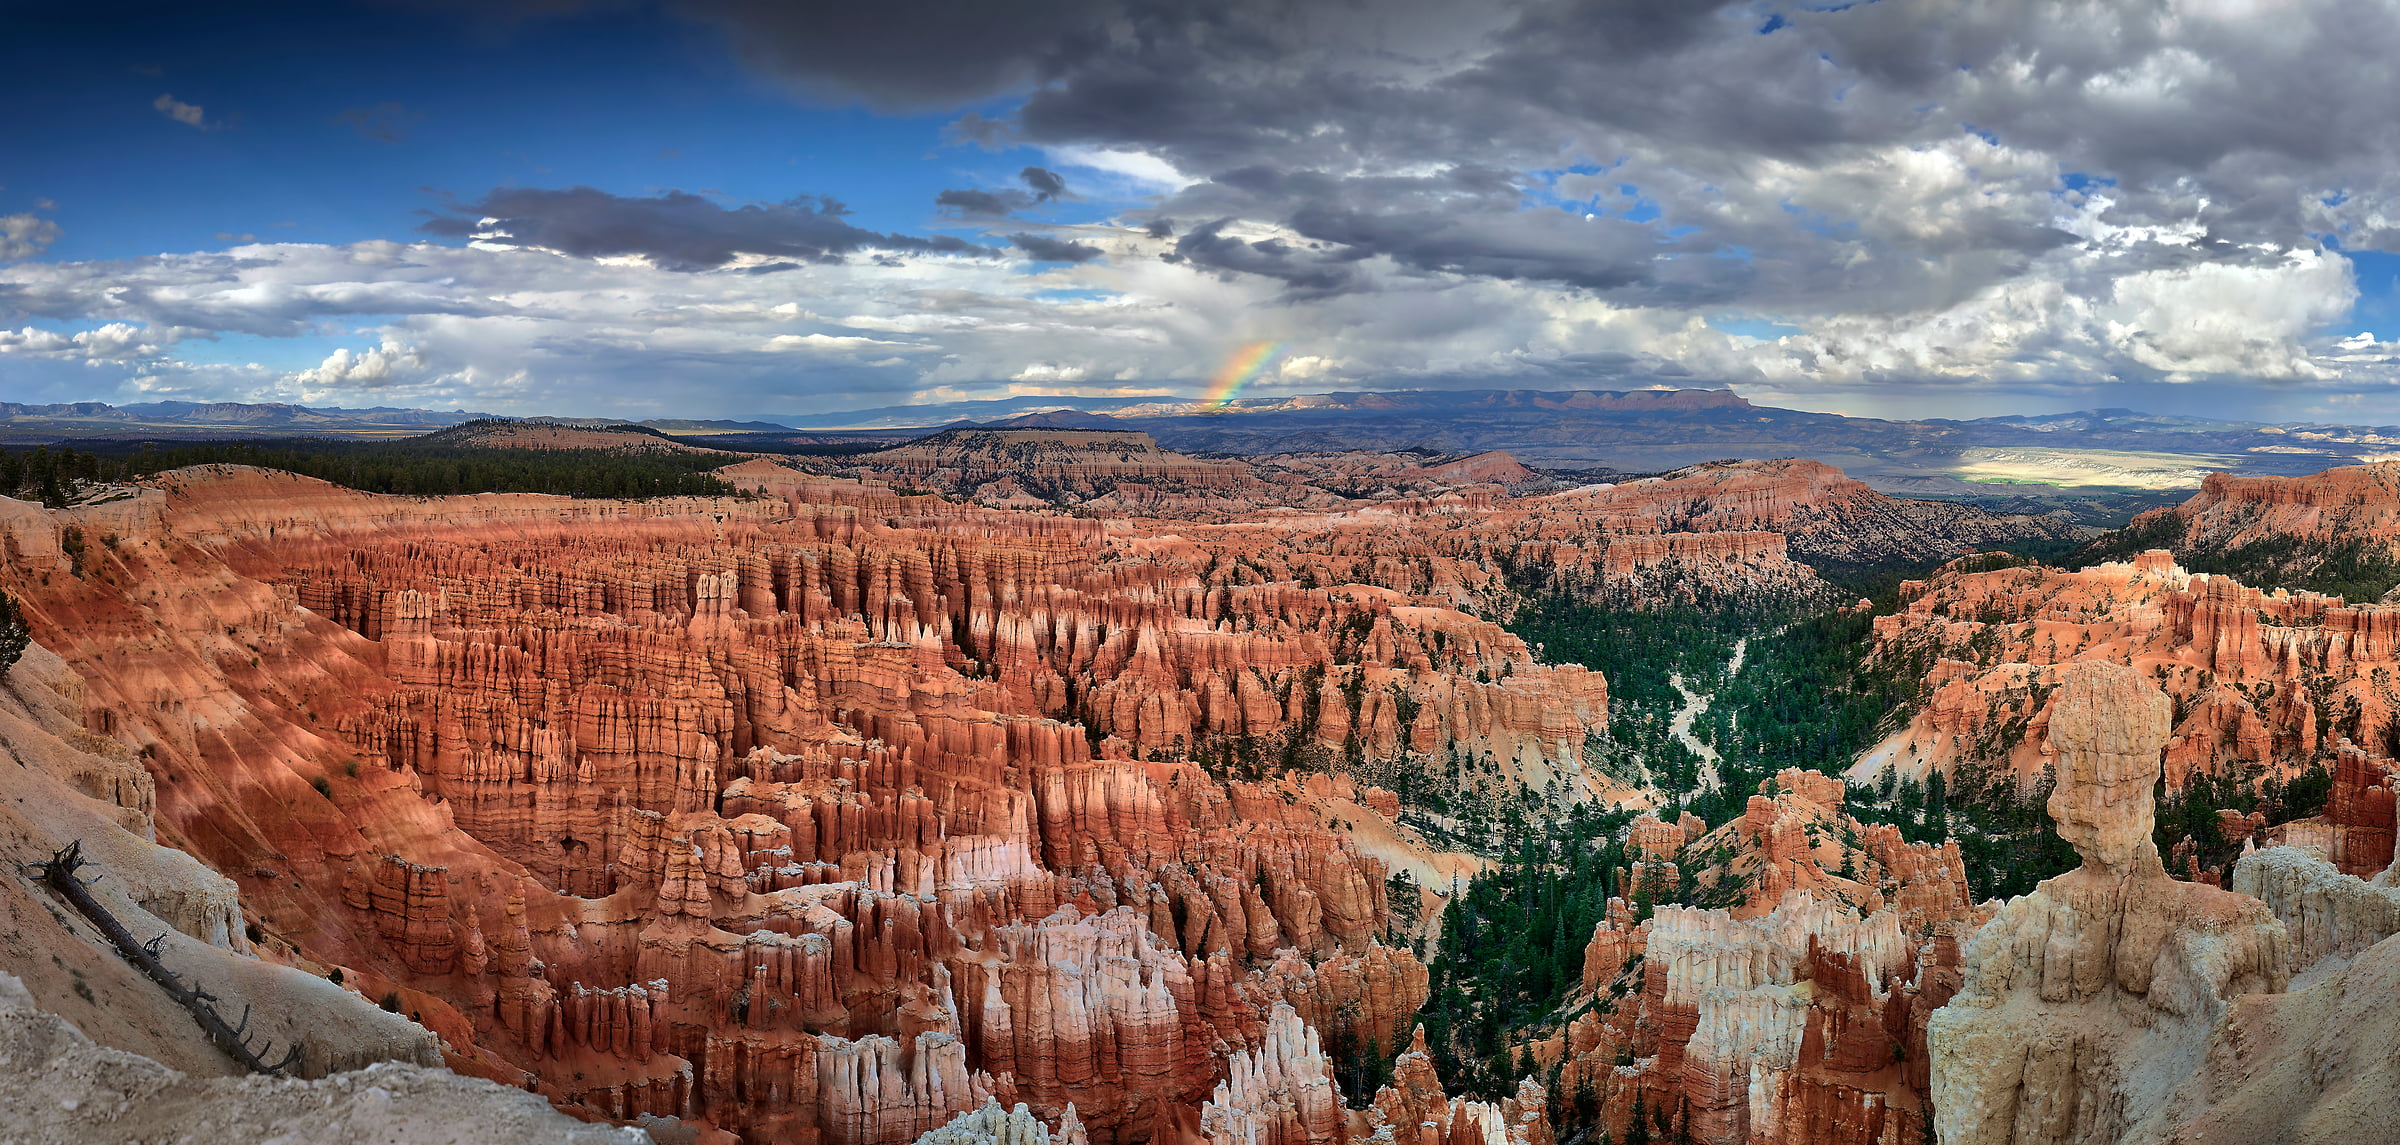 248 megapixels! A very high resolution landscape photo of Bryce Canyon National Park with a rainbow; VAST photo created by Phil Crawshay in Bryce Canyon, Utah, USA